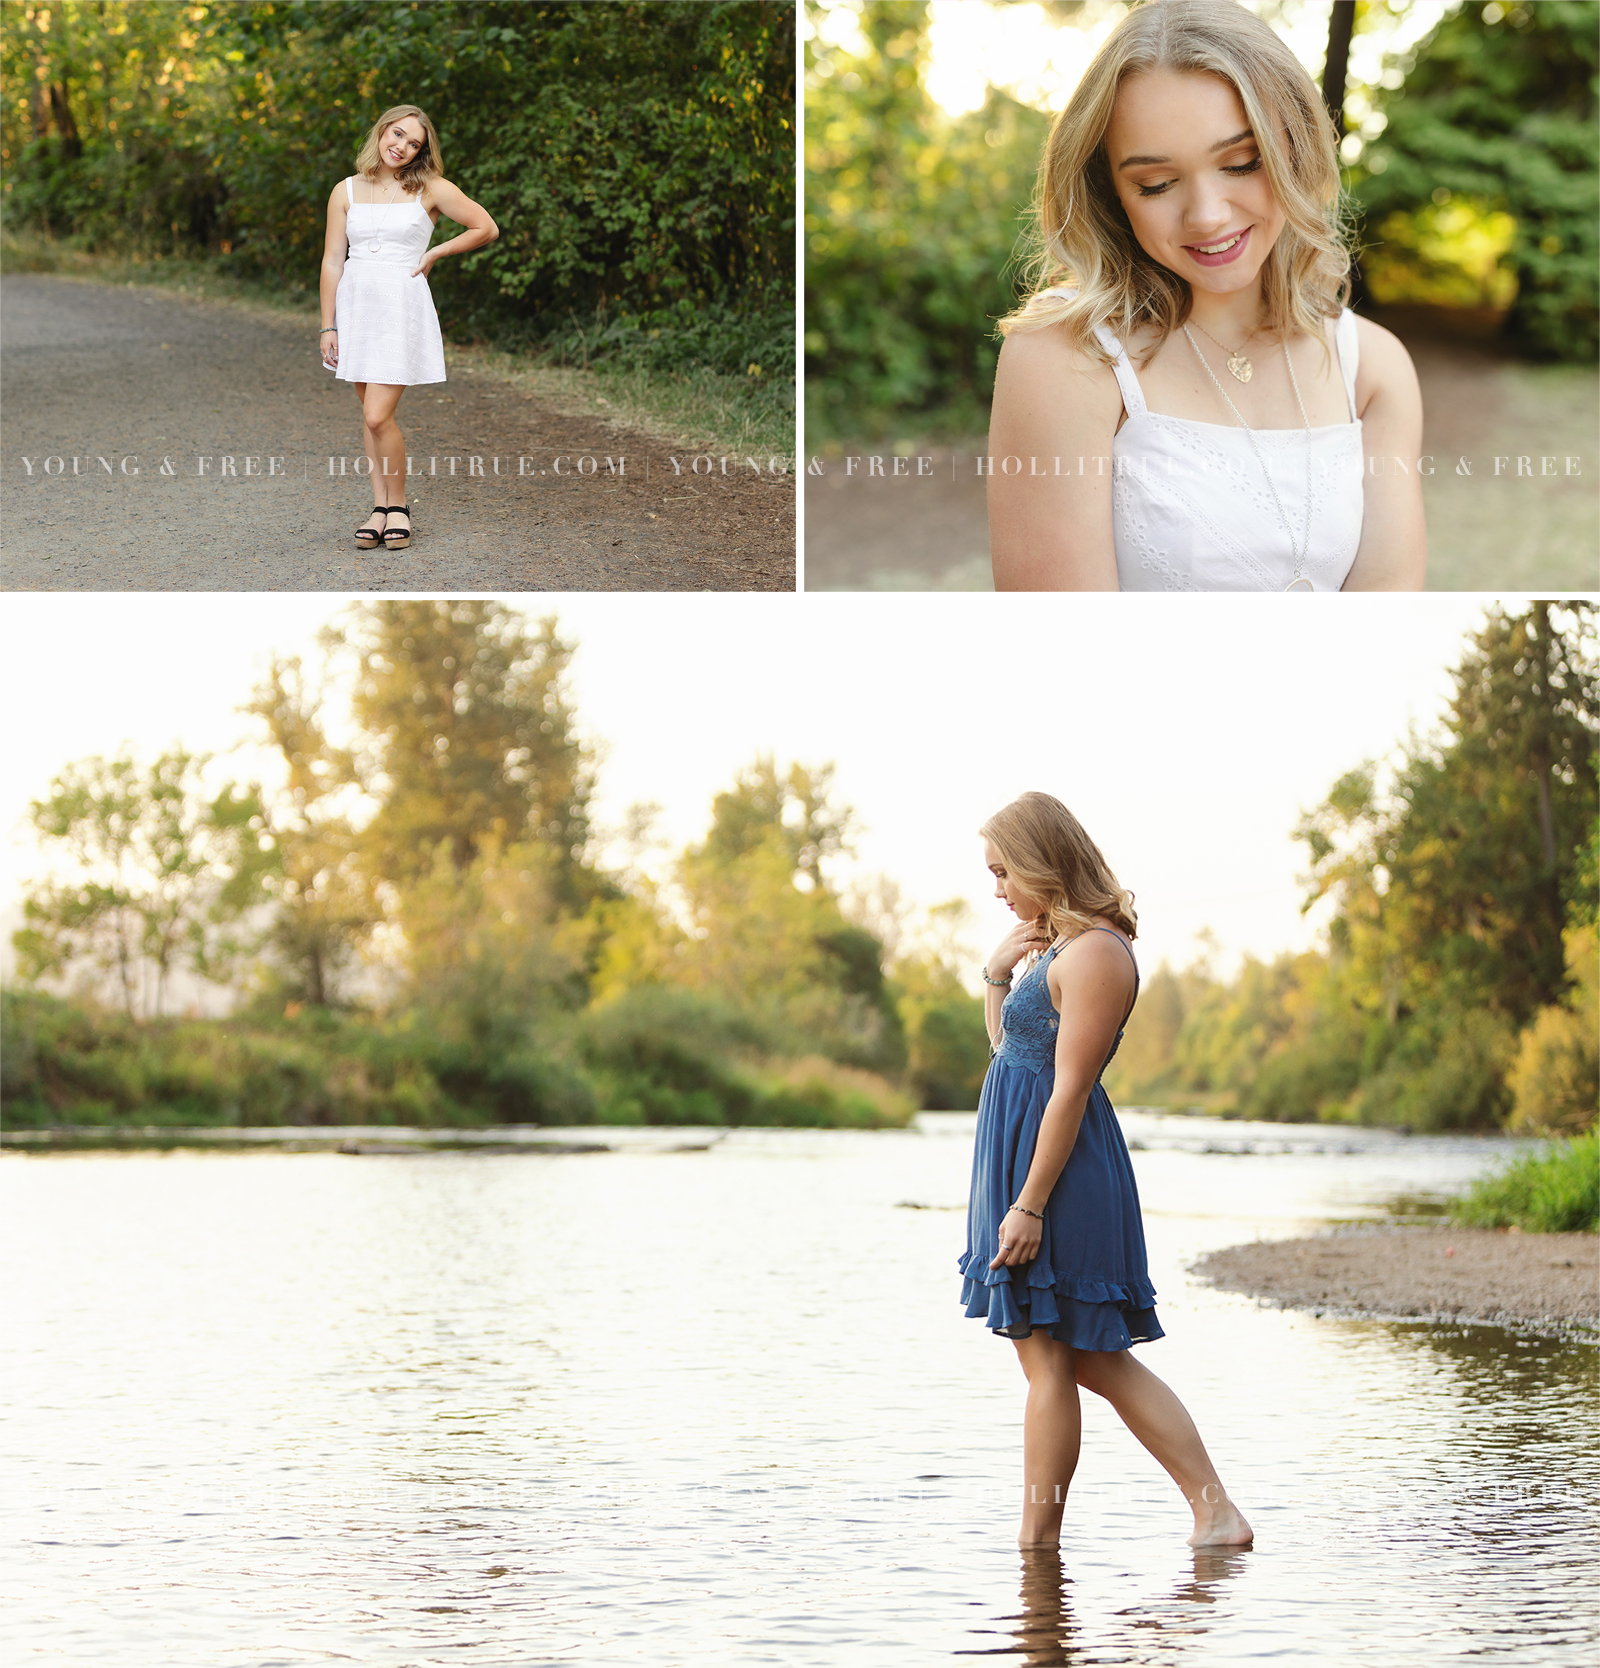 Summer senior pictures in a river at sunset with Corvallis Oregon high school senior, Sierra, by Holli True Photography